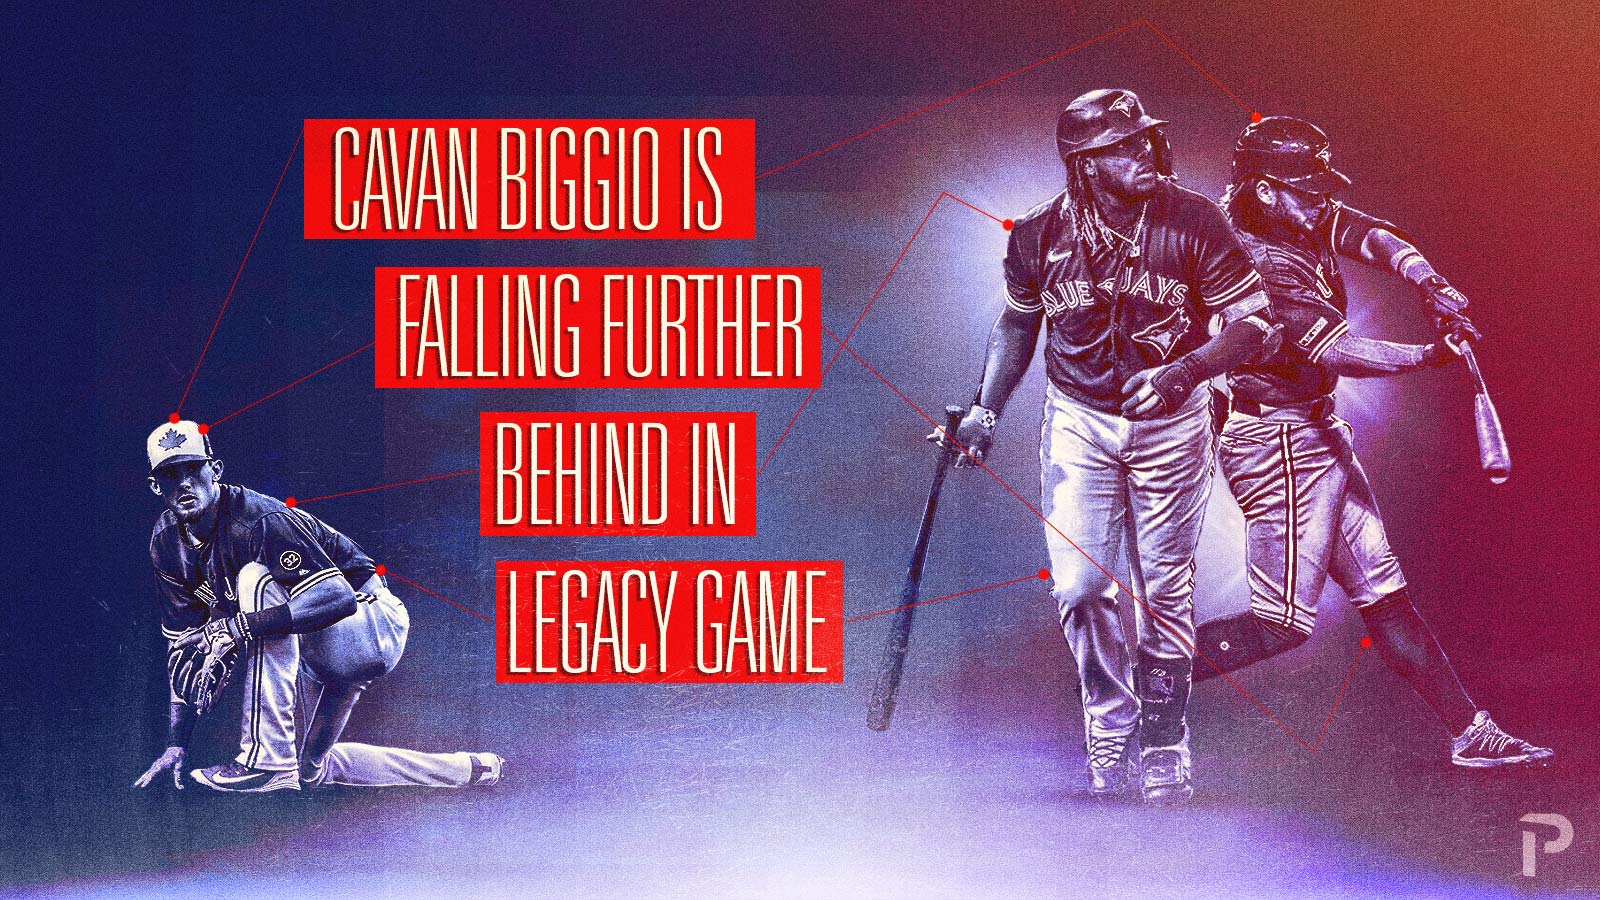 The Jays' Cavan Biggio is back, hoping something good can come